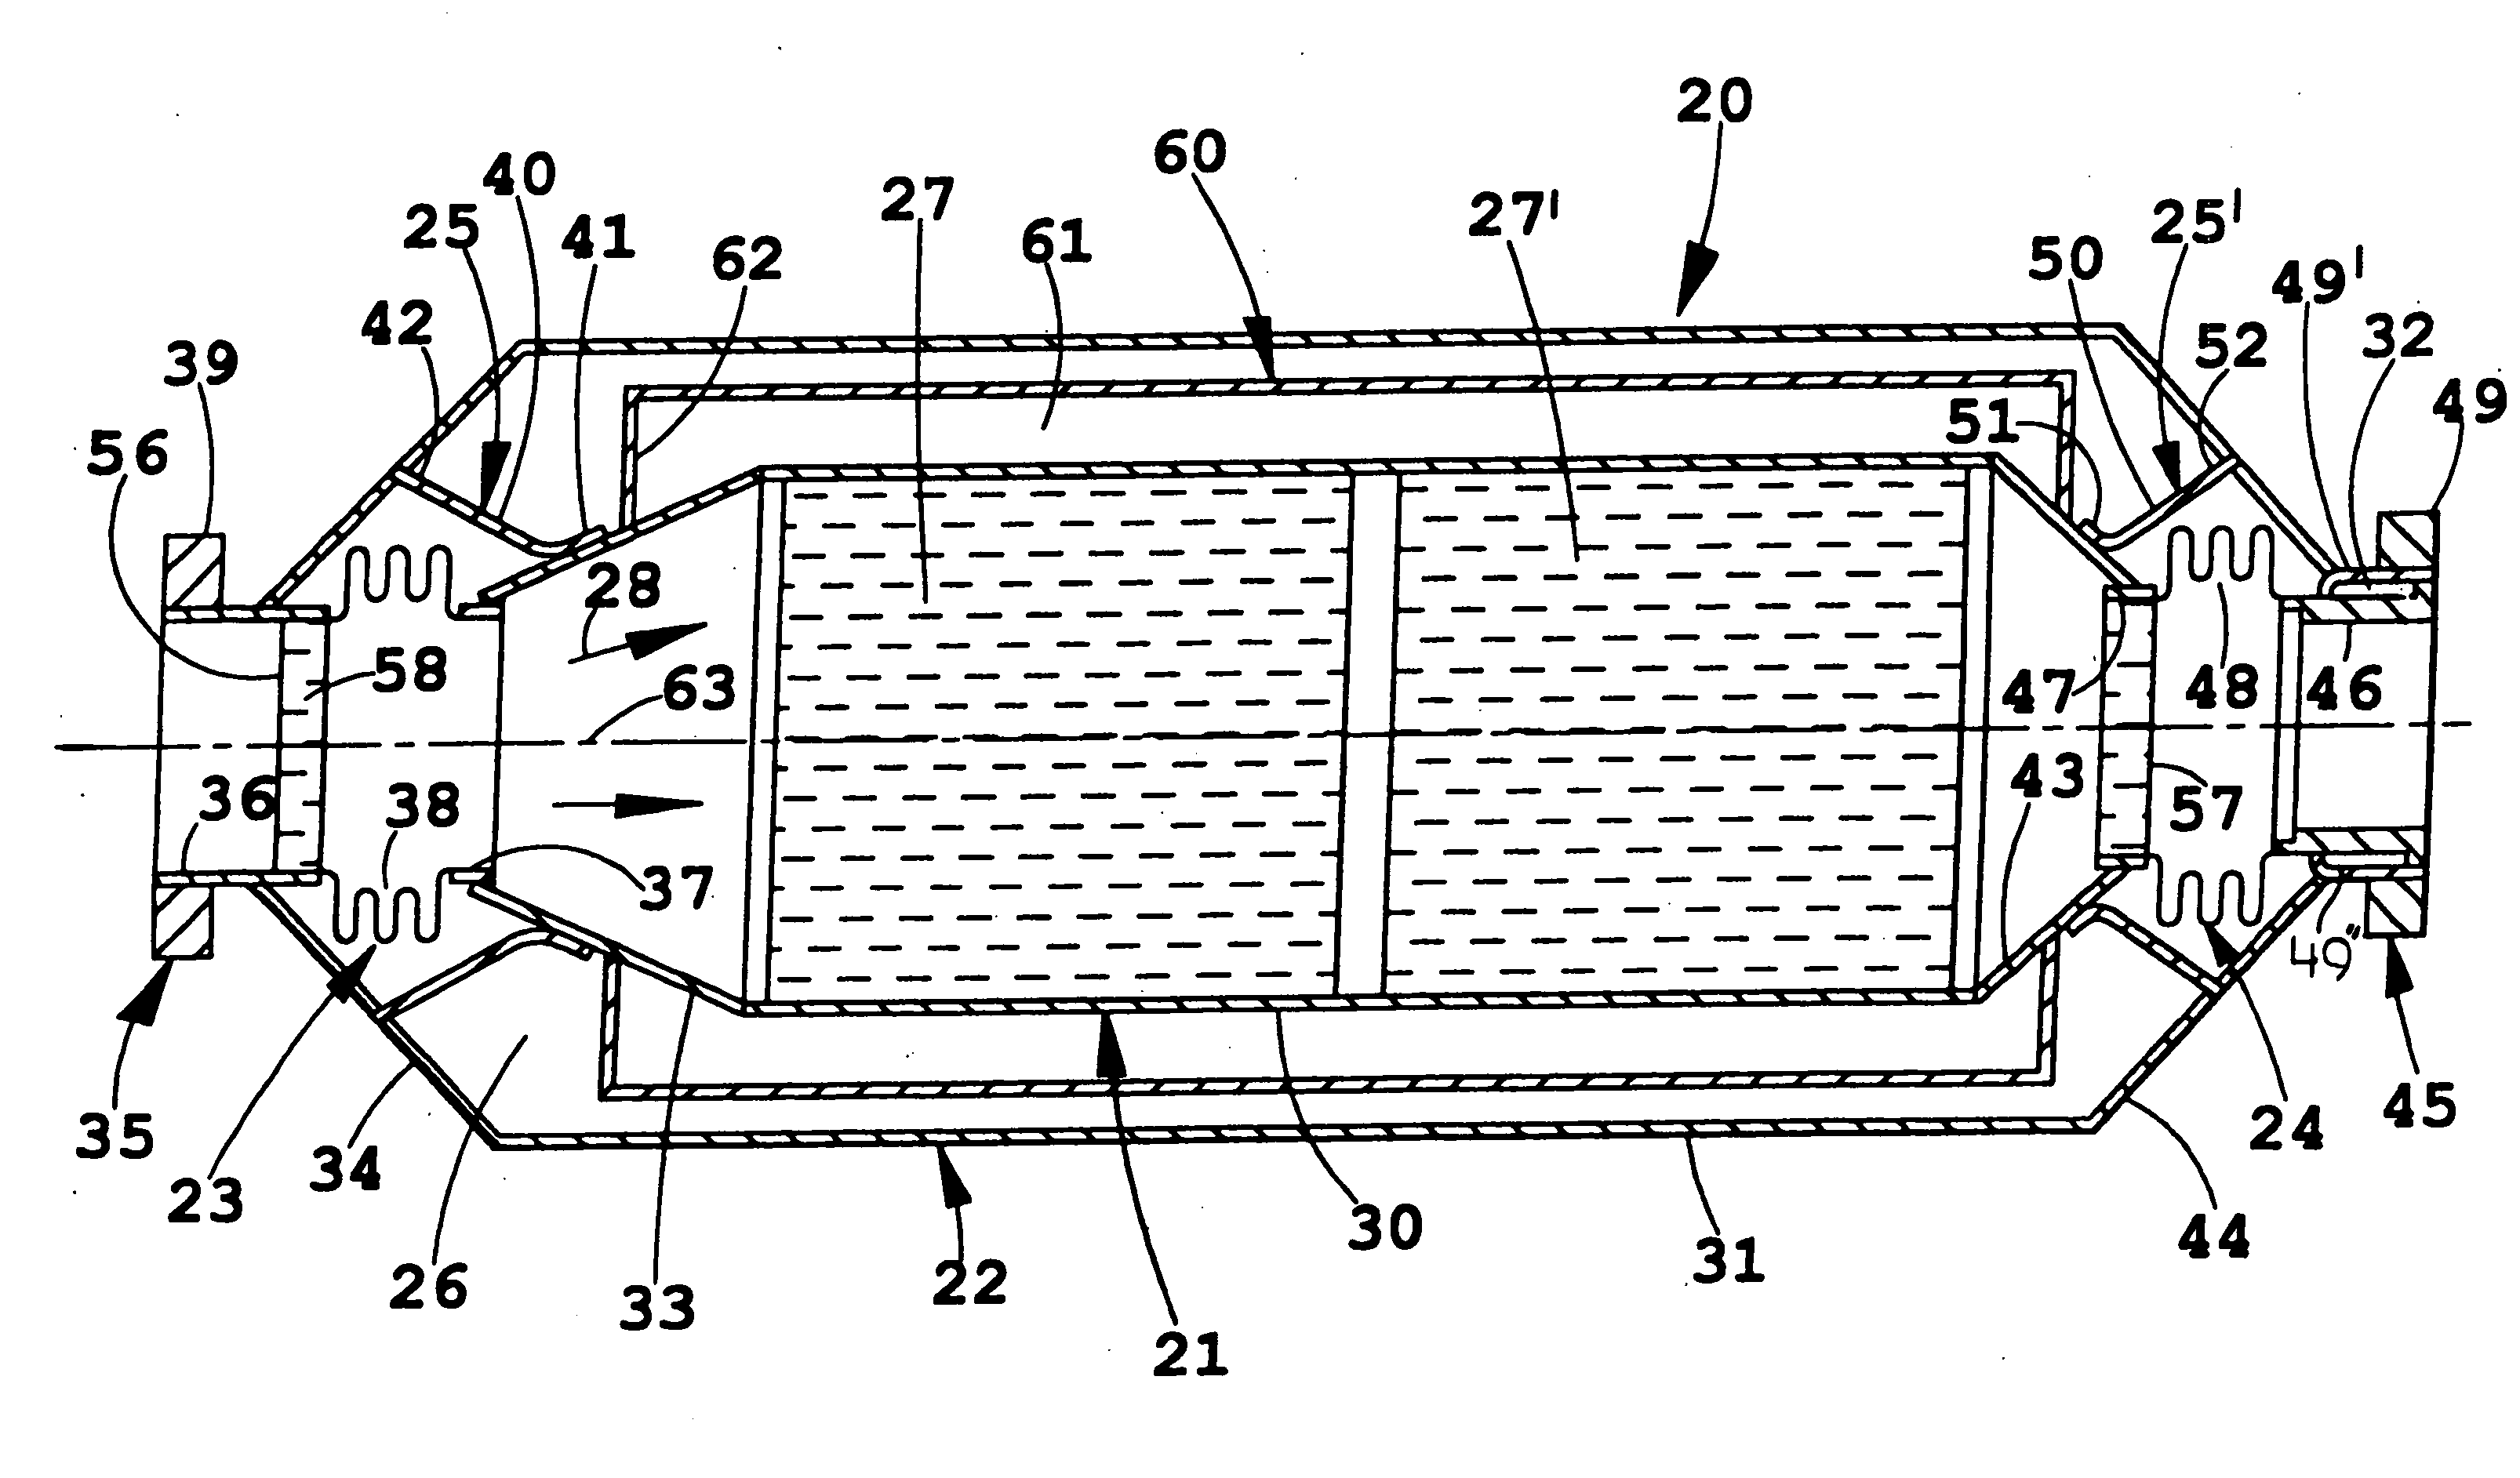 Vacuum-insulated exhaust treatment devices, such as catalytic converters, with passive controls